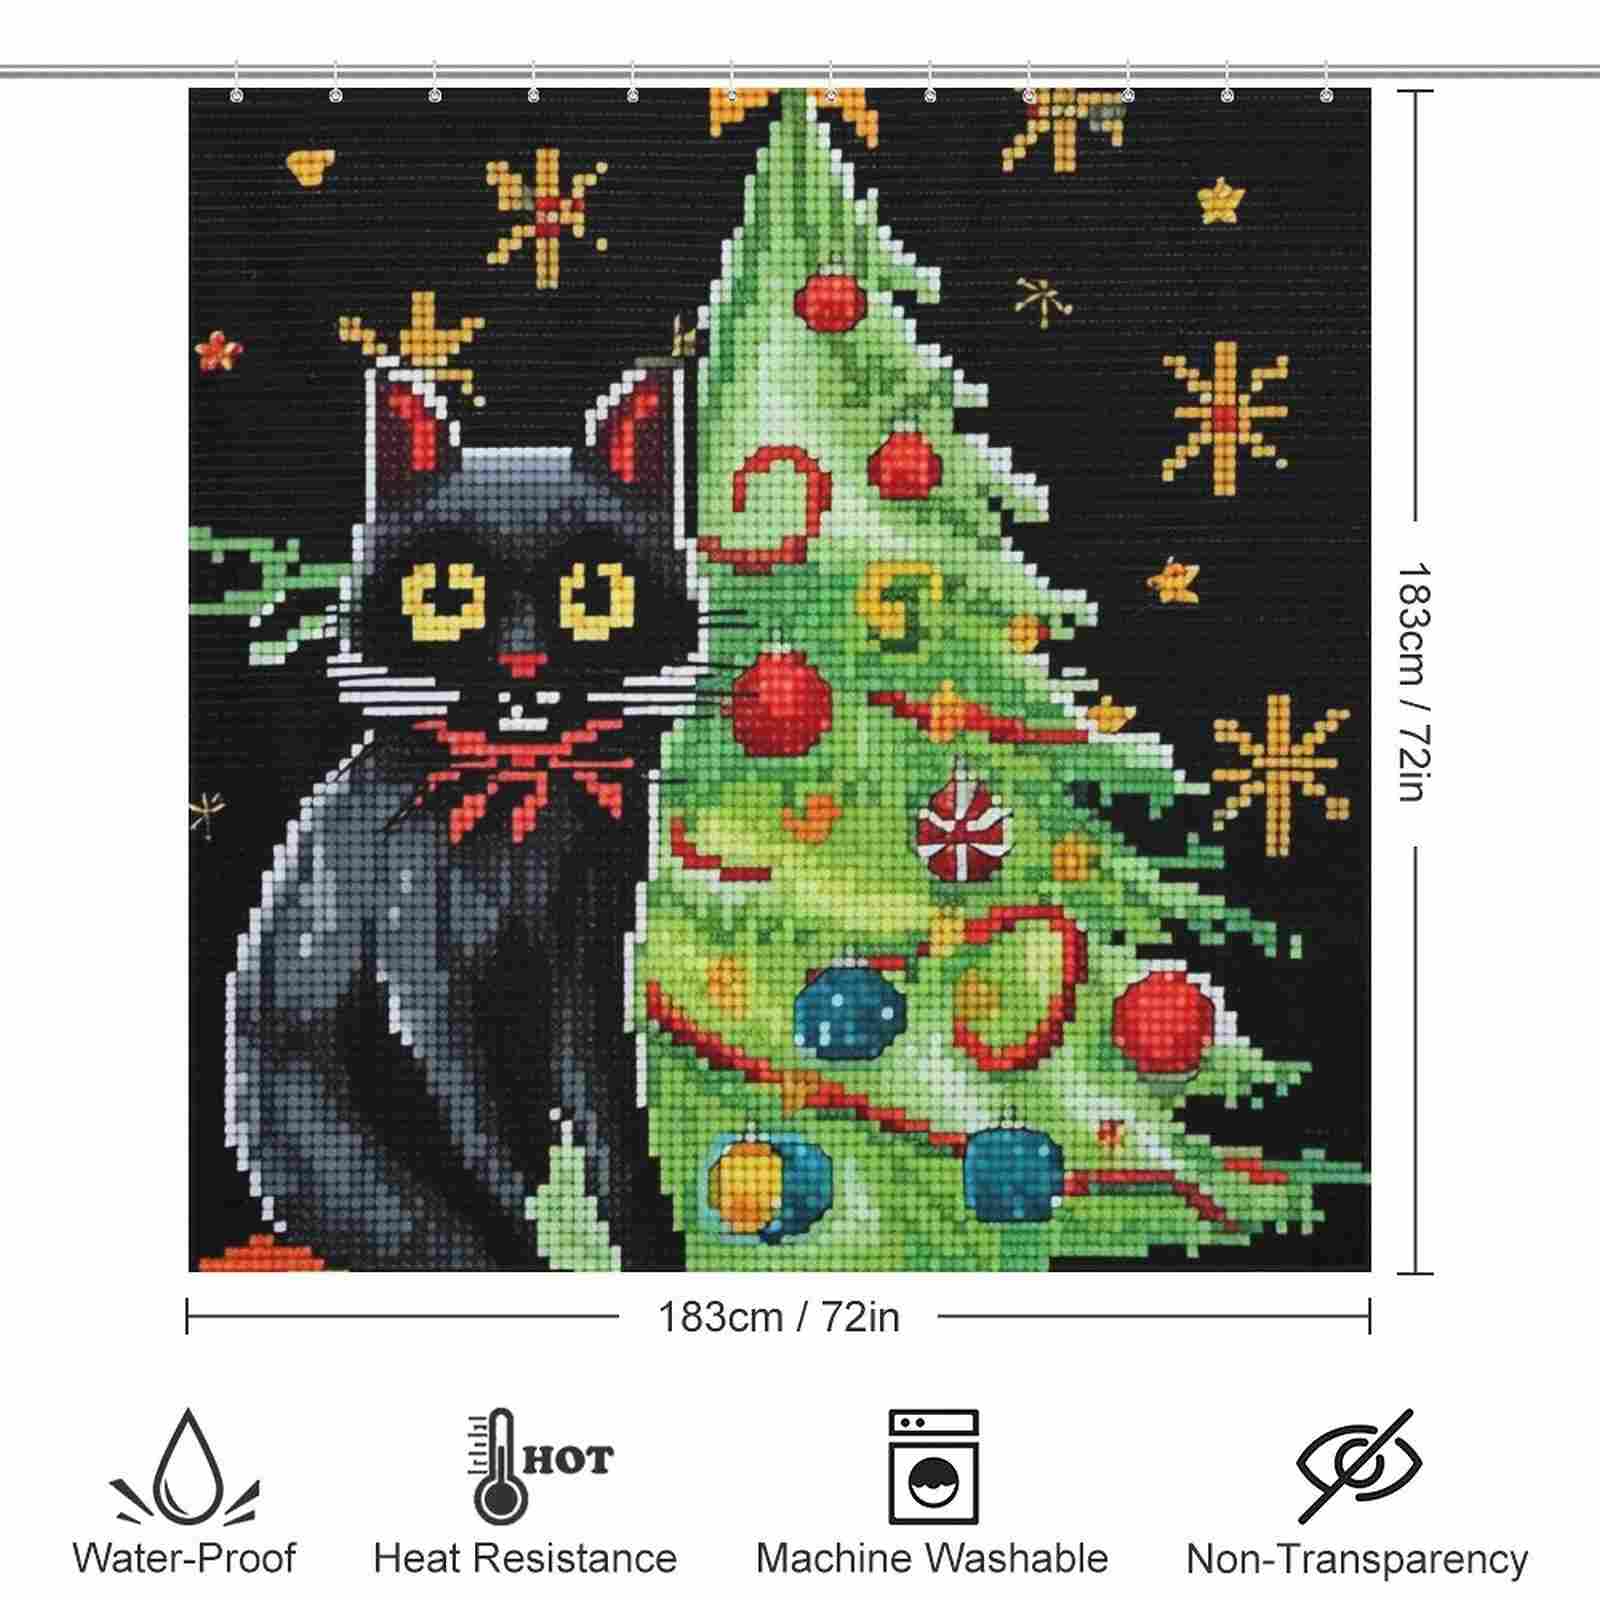 A Funny Mosaic Black Cat Christmas Shower Curtain near a Christmas Tree from the brand Cotton Cat.